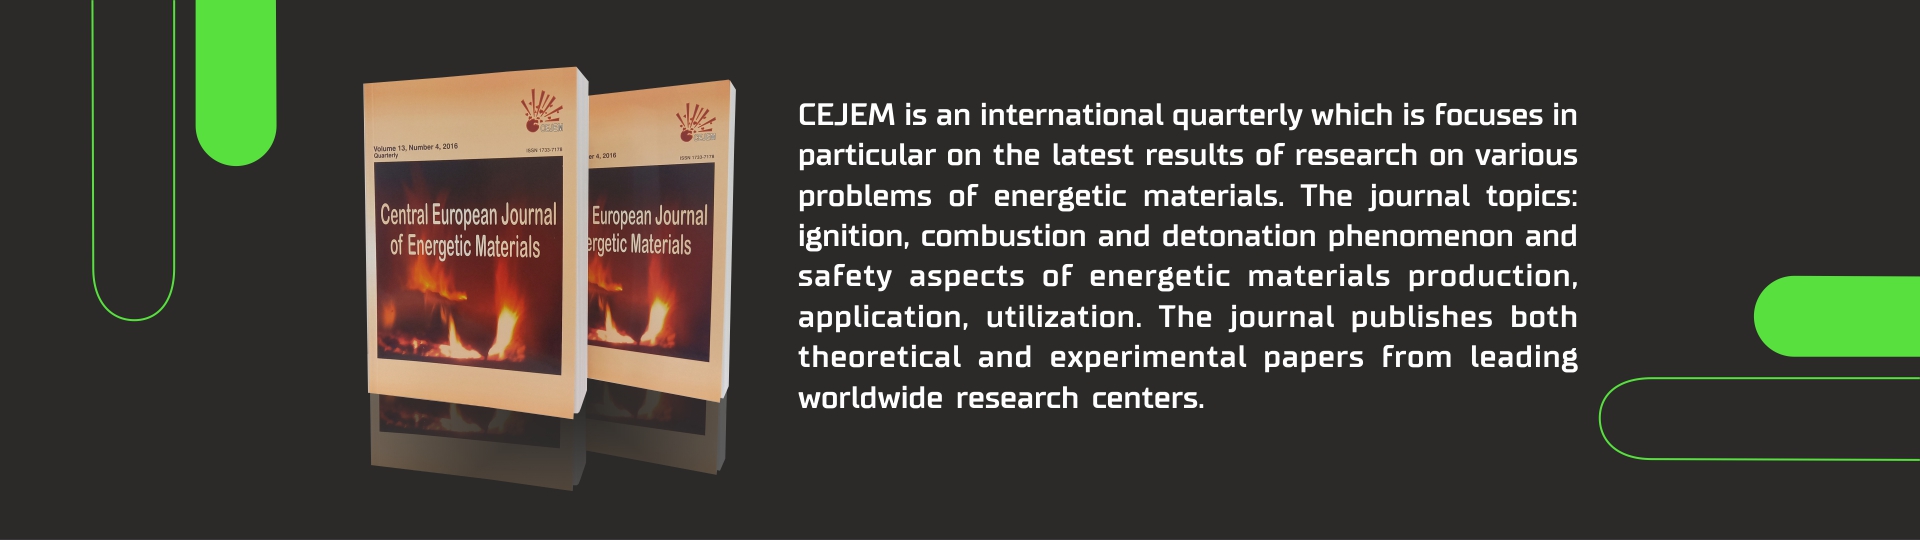 CEJEM is an international quarterly which is focuses in particular on the latest results of research on various problems of energetic materials. The journal topics: ignition, combustion and detonation phenomenon and safety aspects of energetic materials production, application, utilization. The journal publishes both theoretical and experimental papers from leading worldwide research centers.